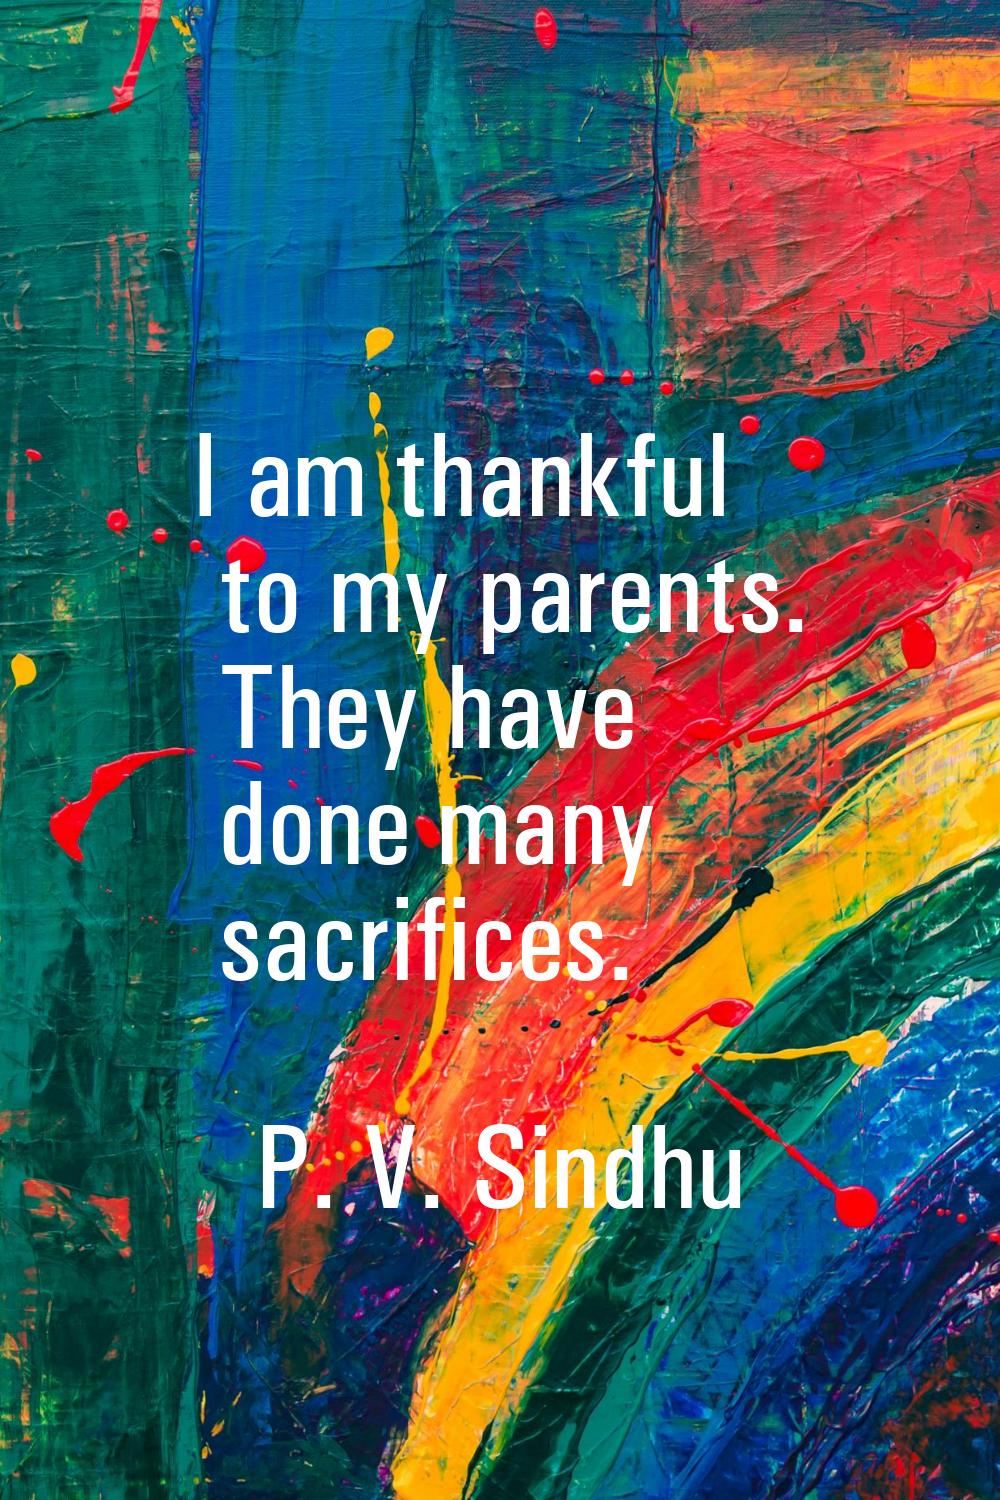 I am thankful to my parents. They have done many sacrifices.